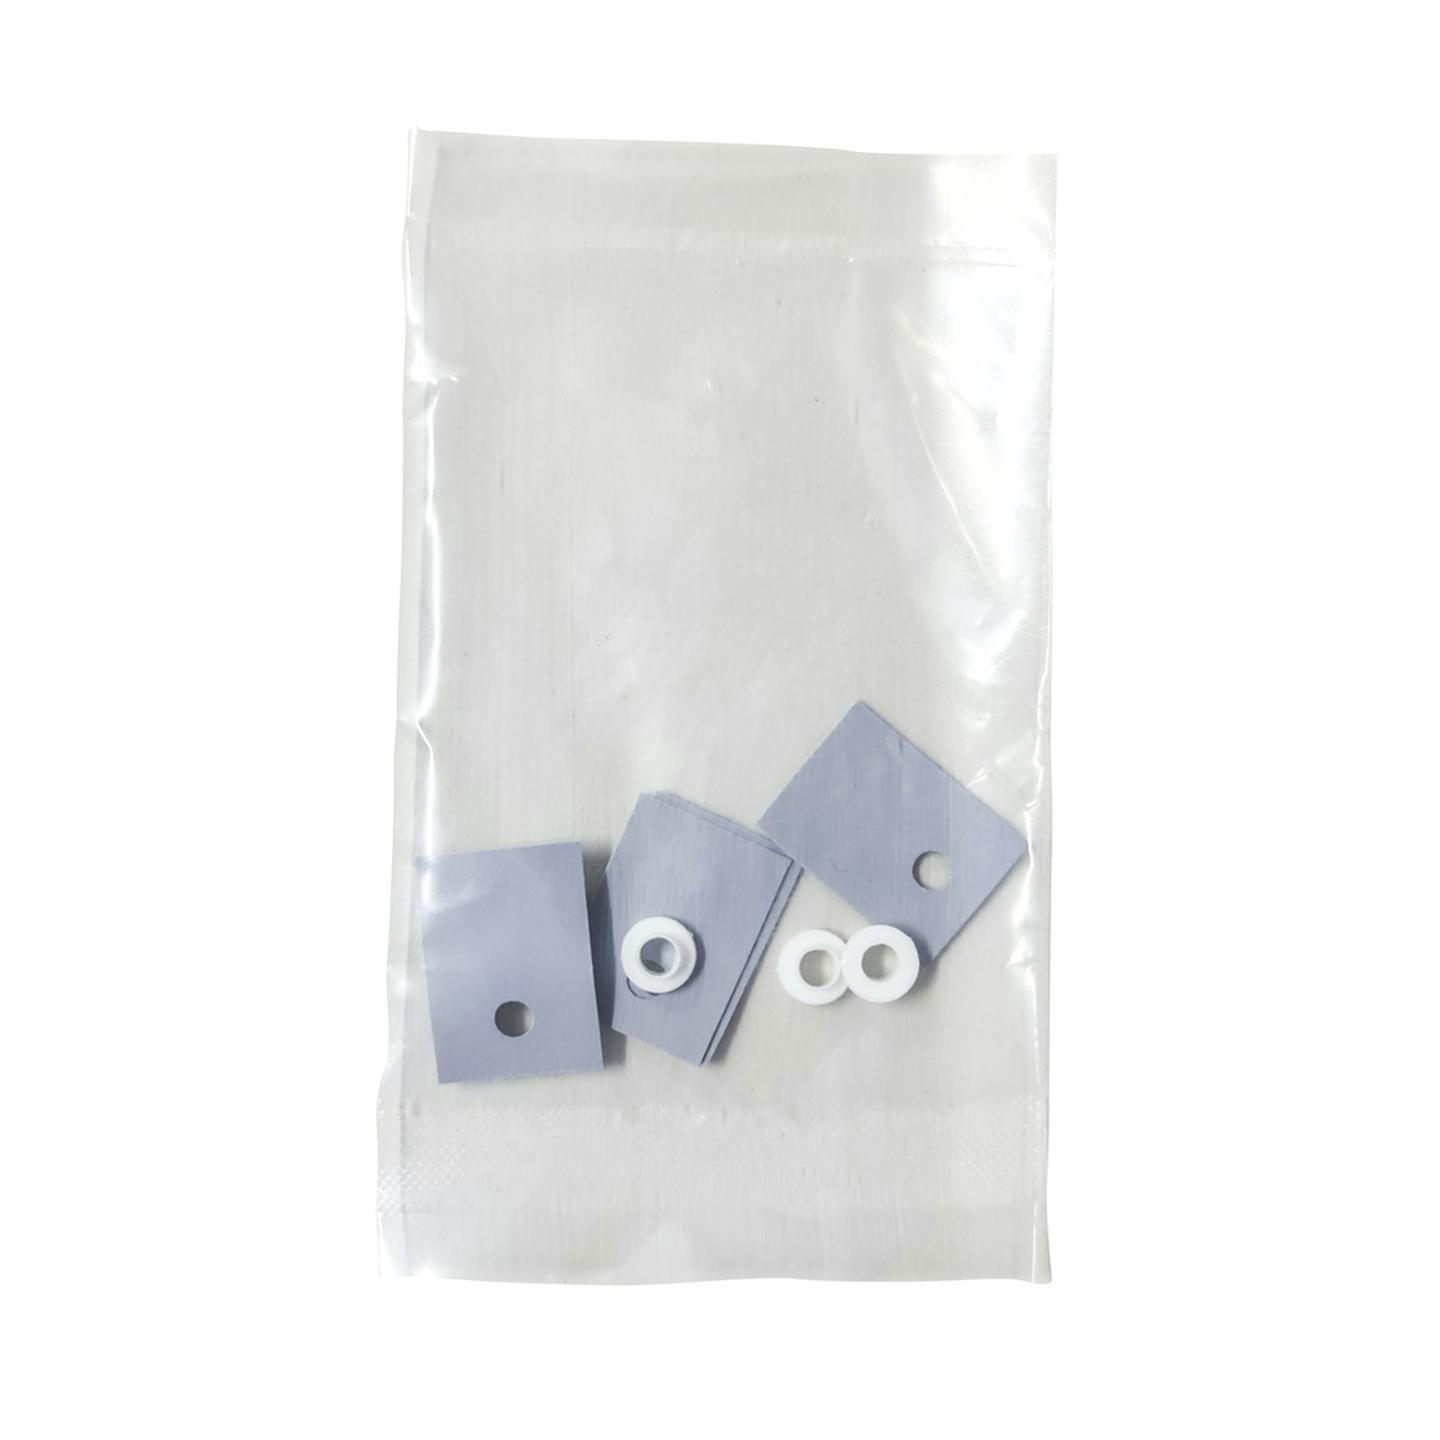 TO-220 Silicone Rubber Insulating Kit - Pack of 4